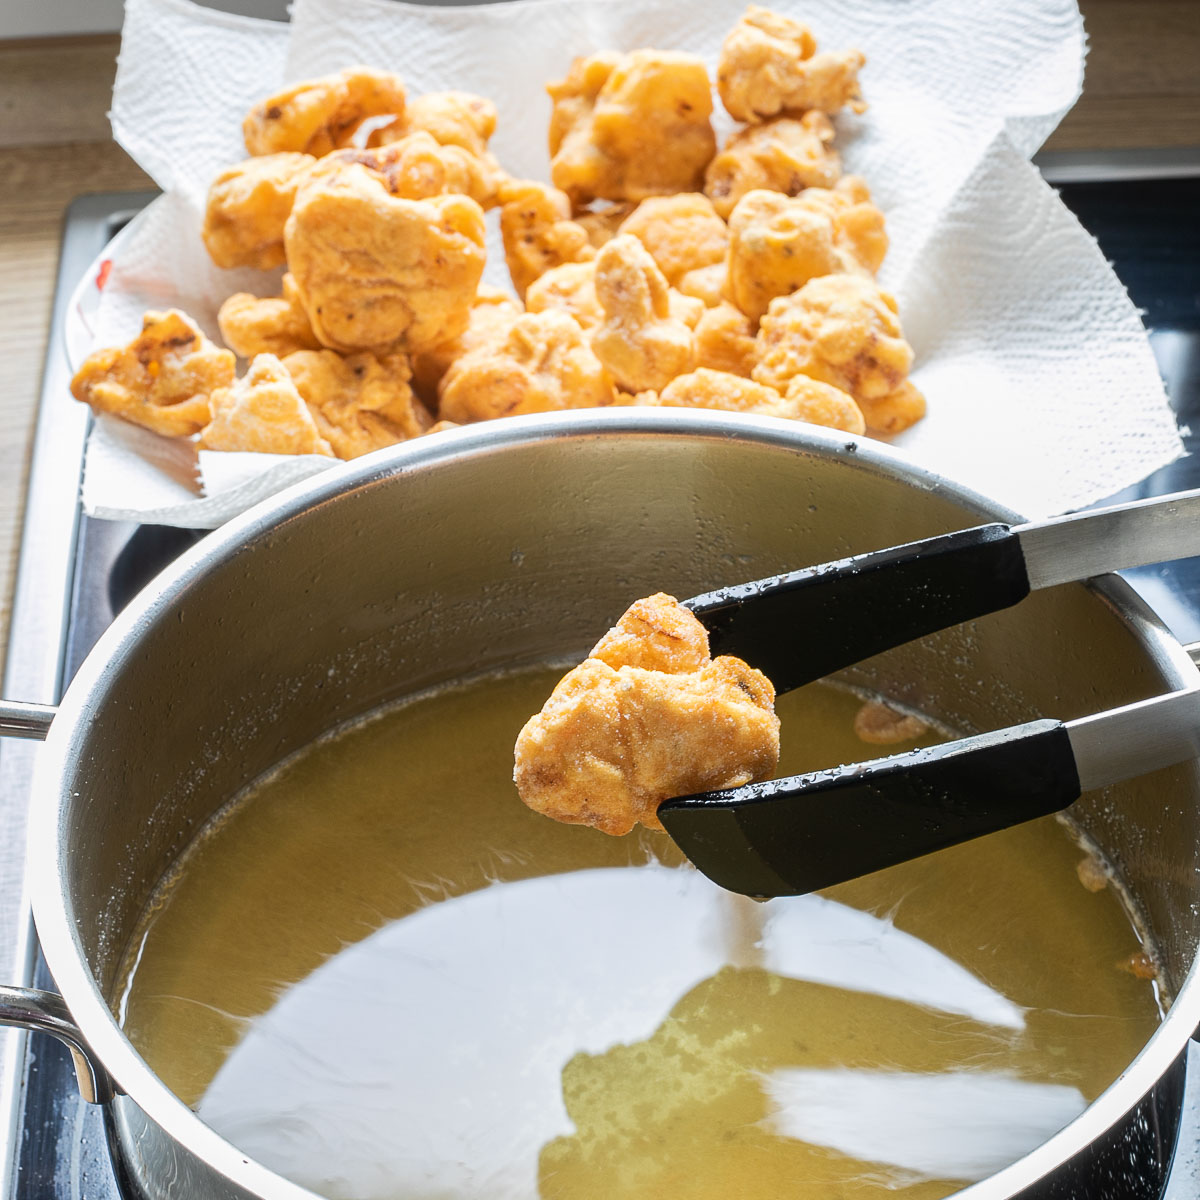 A large pot with oil. Tongs are holding one breaded and crispy cauliflower floret. Other florets are ready and behind the pot on white paper towel.